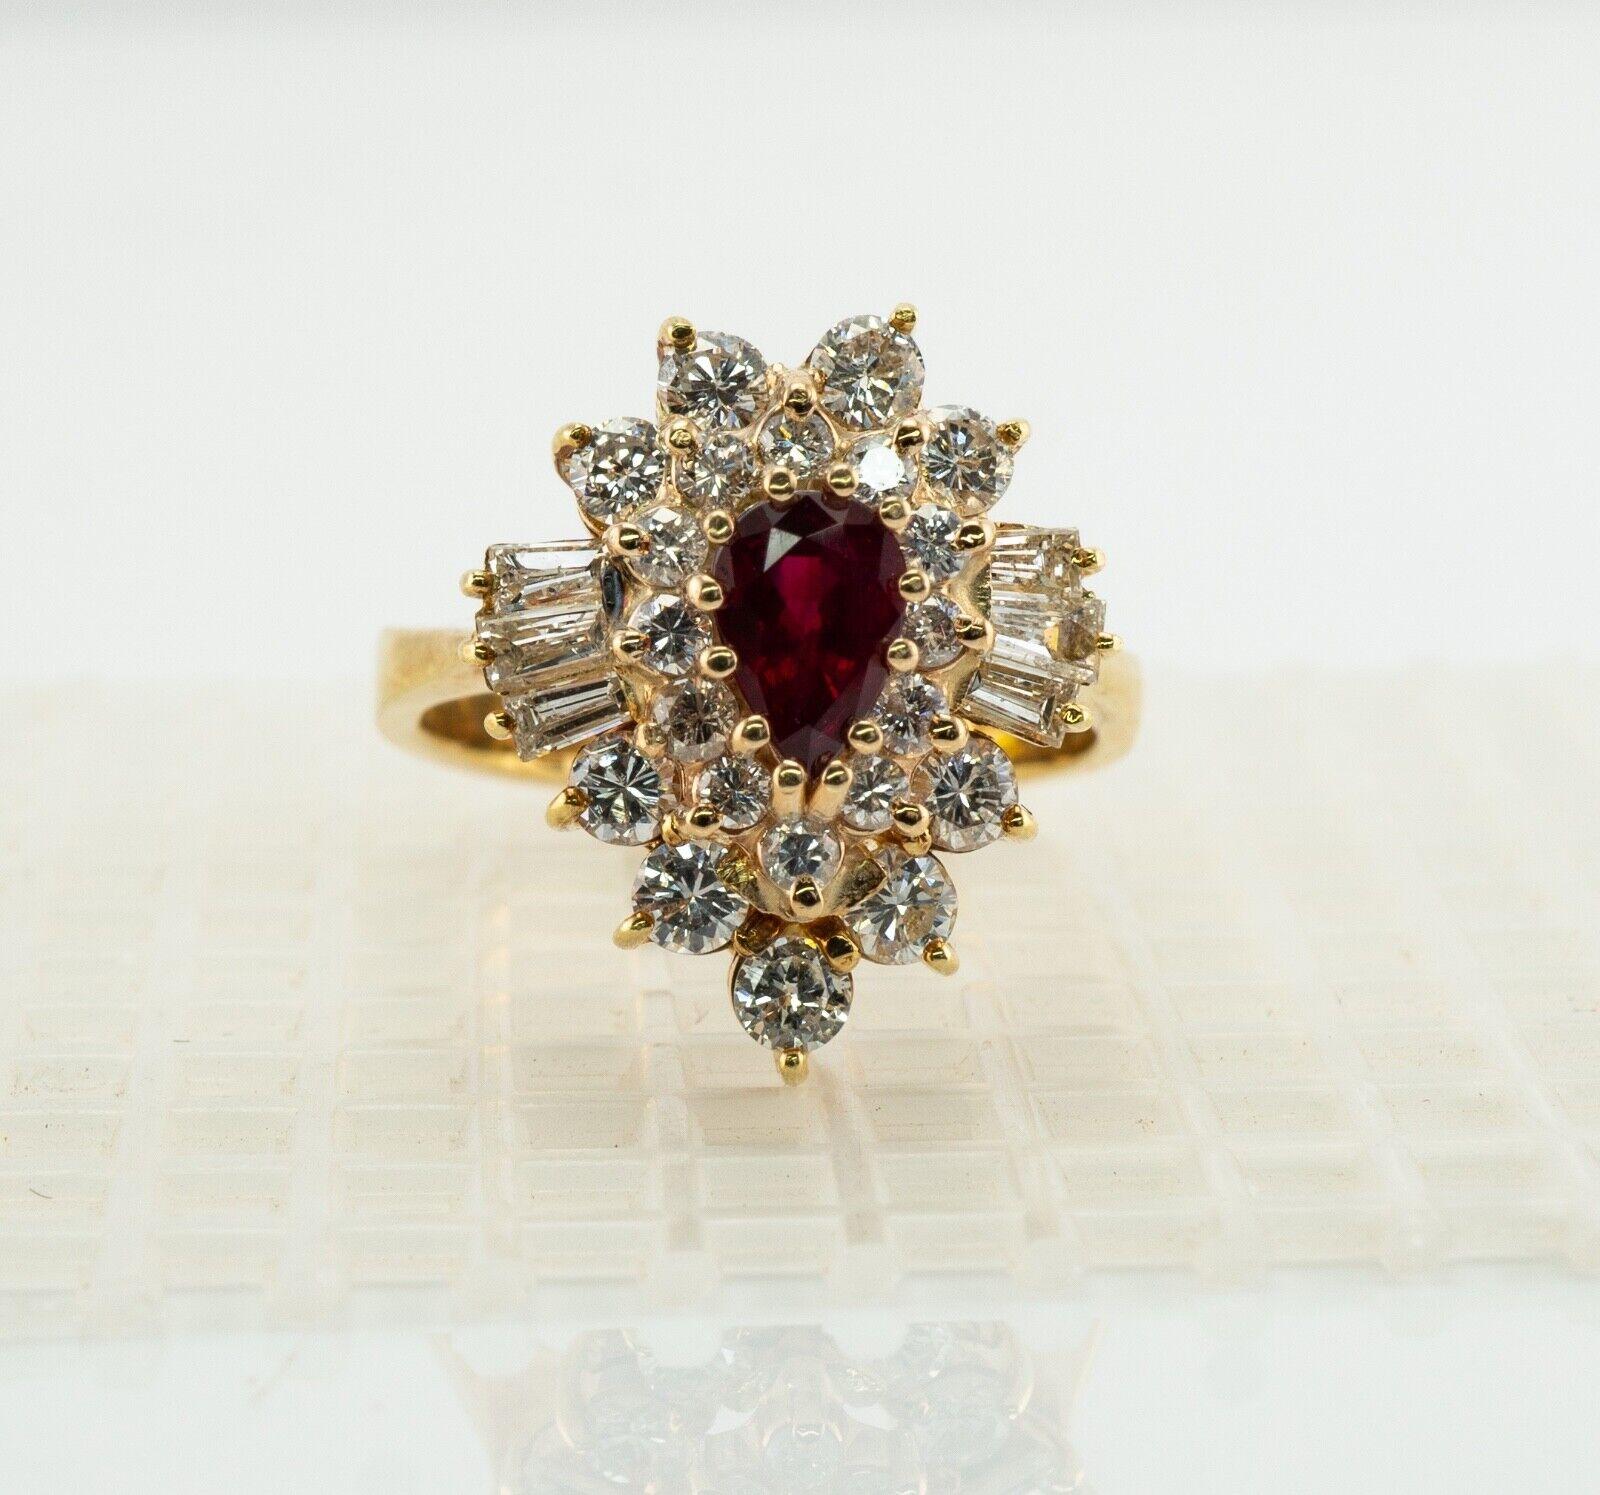 This gorgeous estate ring is finely crafted in solid 14K Yellow Gold and set with genuine Ruby and diamonds. The center Earth-mined pear cut Ruby measures 6mm x 4mm (.50 carat) and this is a very clean and transparent gem of great intensity and